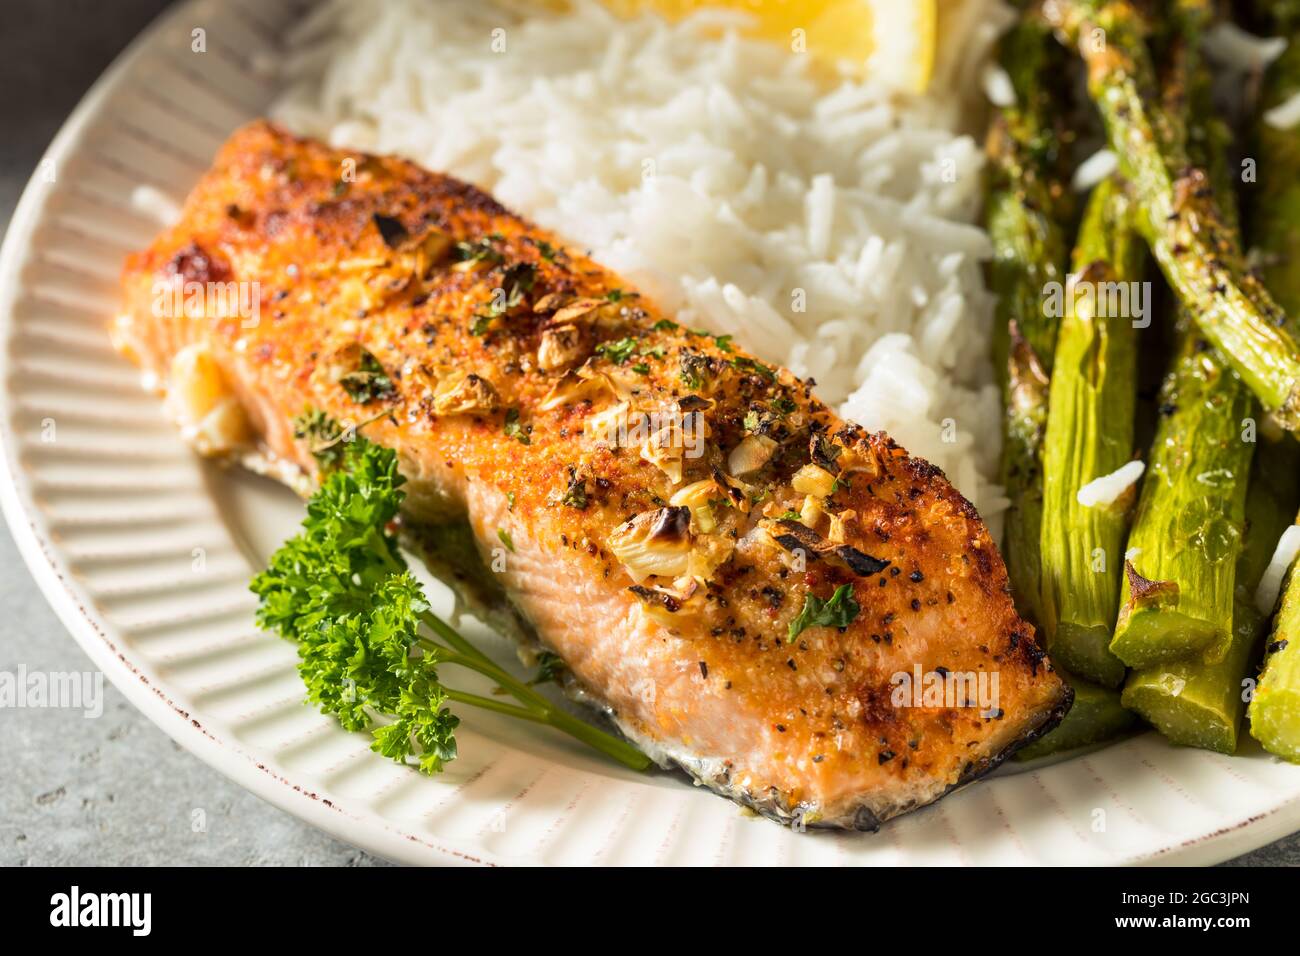 Healthy Homemade Roasted Salmon with Asparagus with Rice Stock Photo